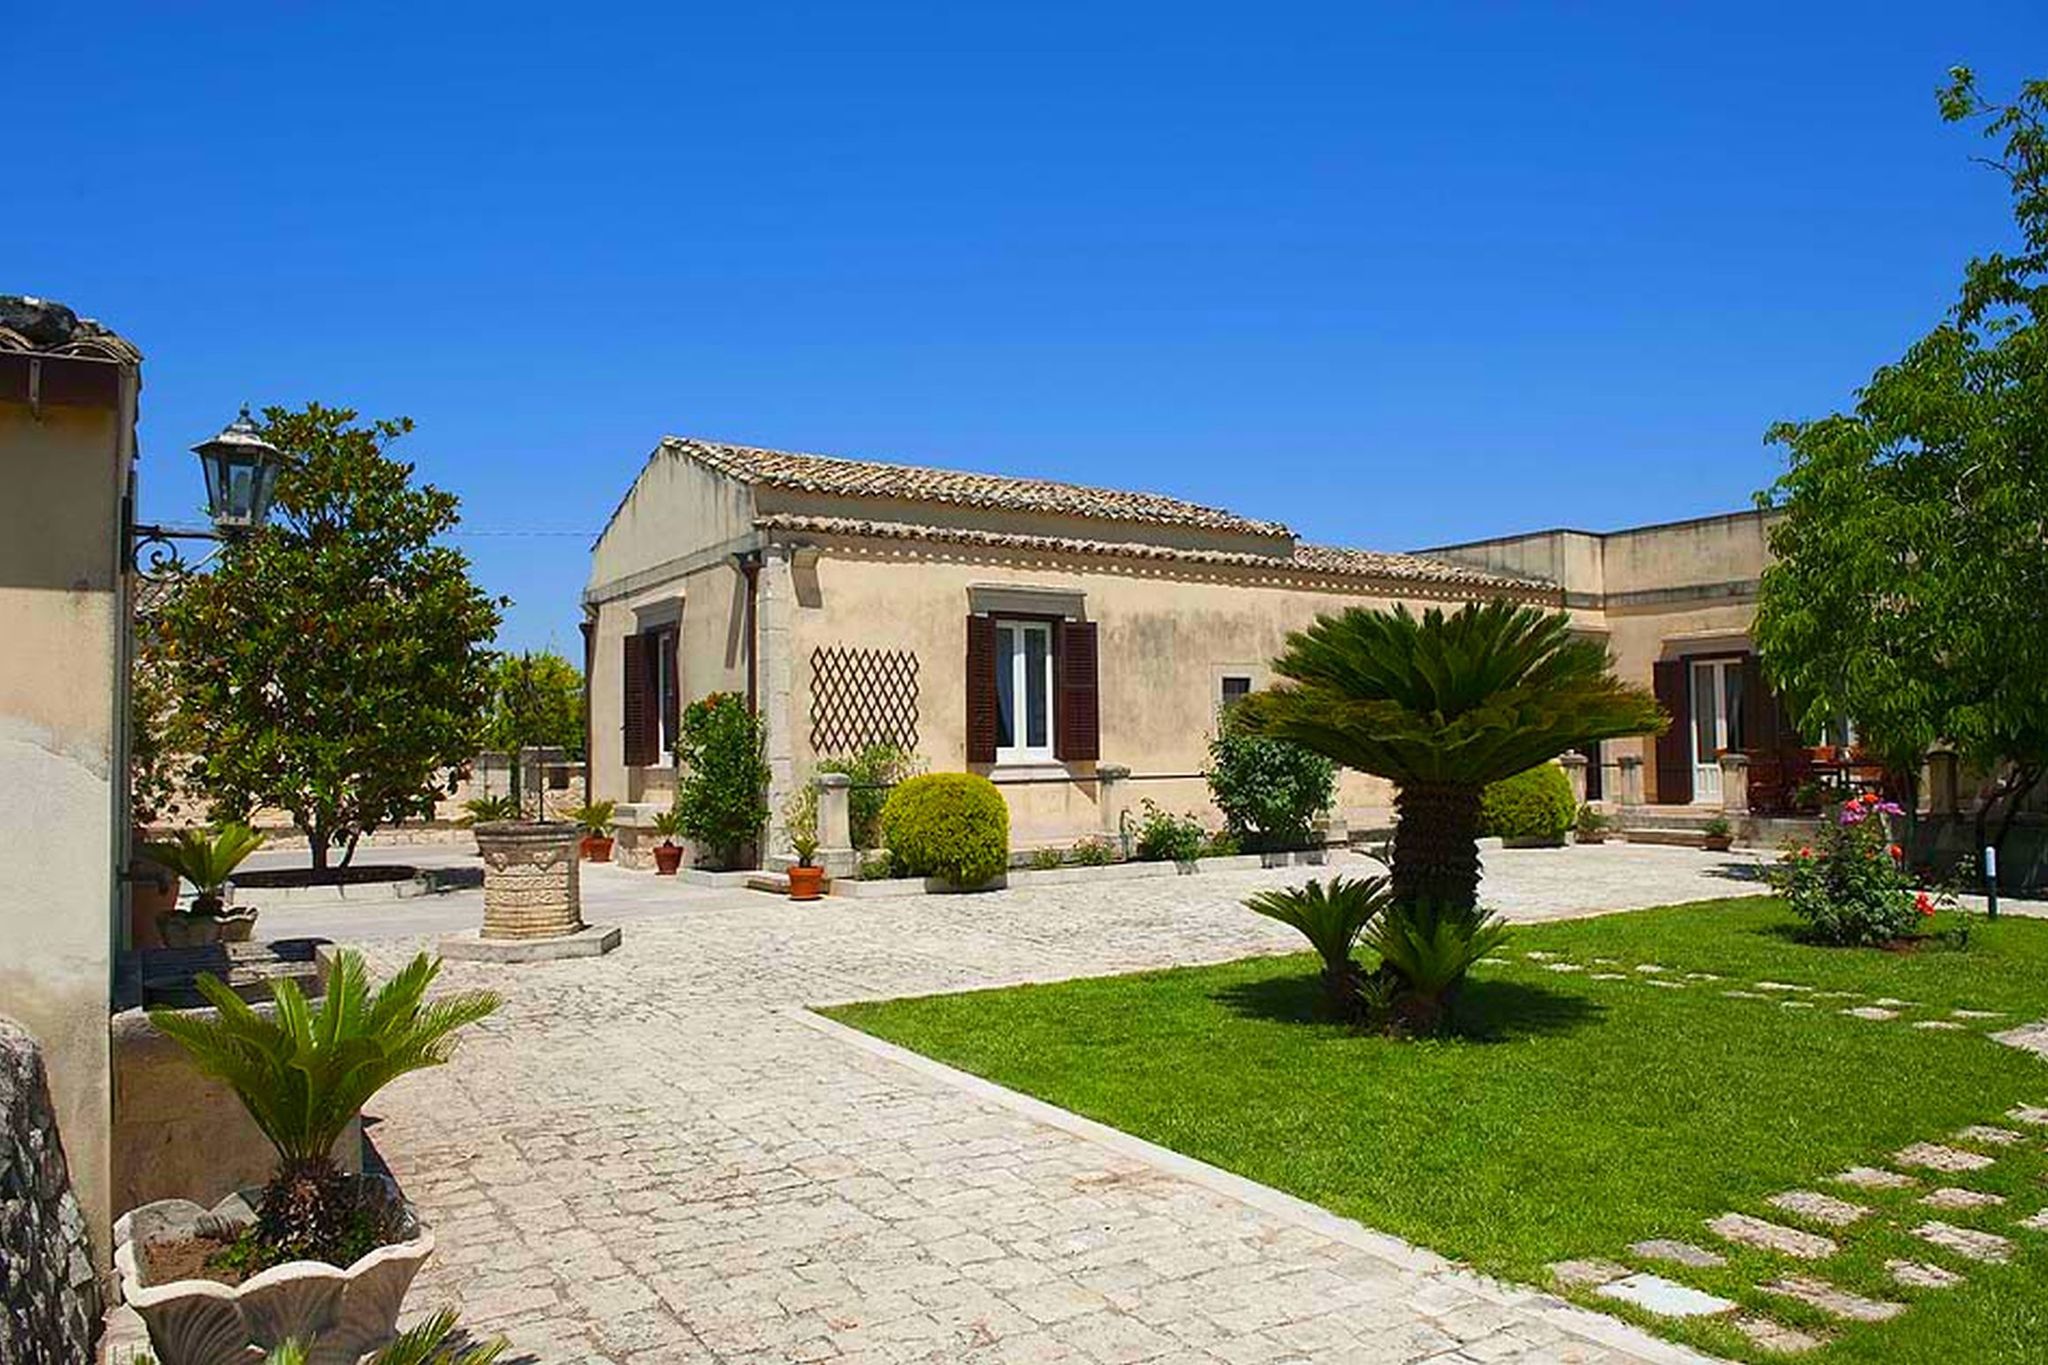 Charming part of traditional 'Baglio' with pool and strategic location.